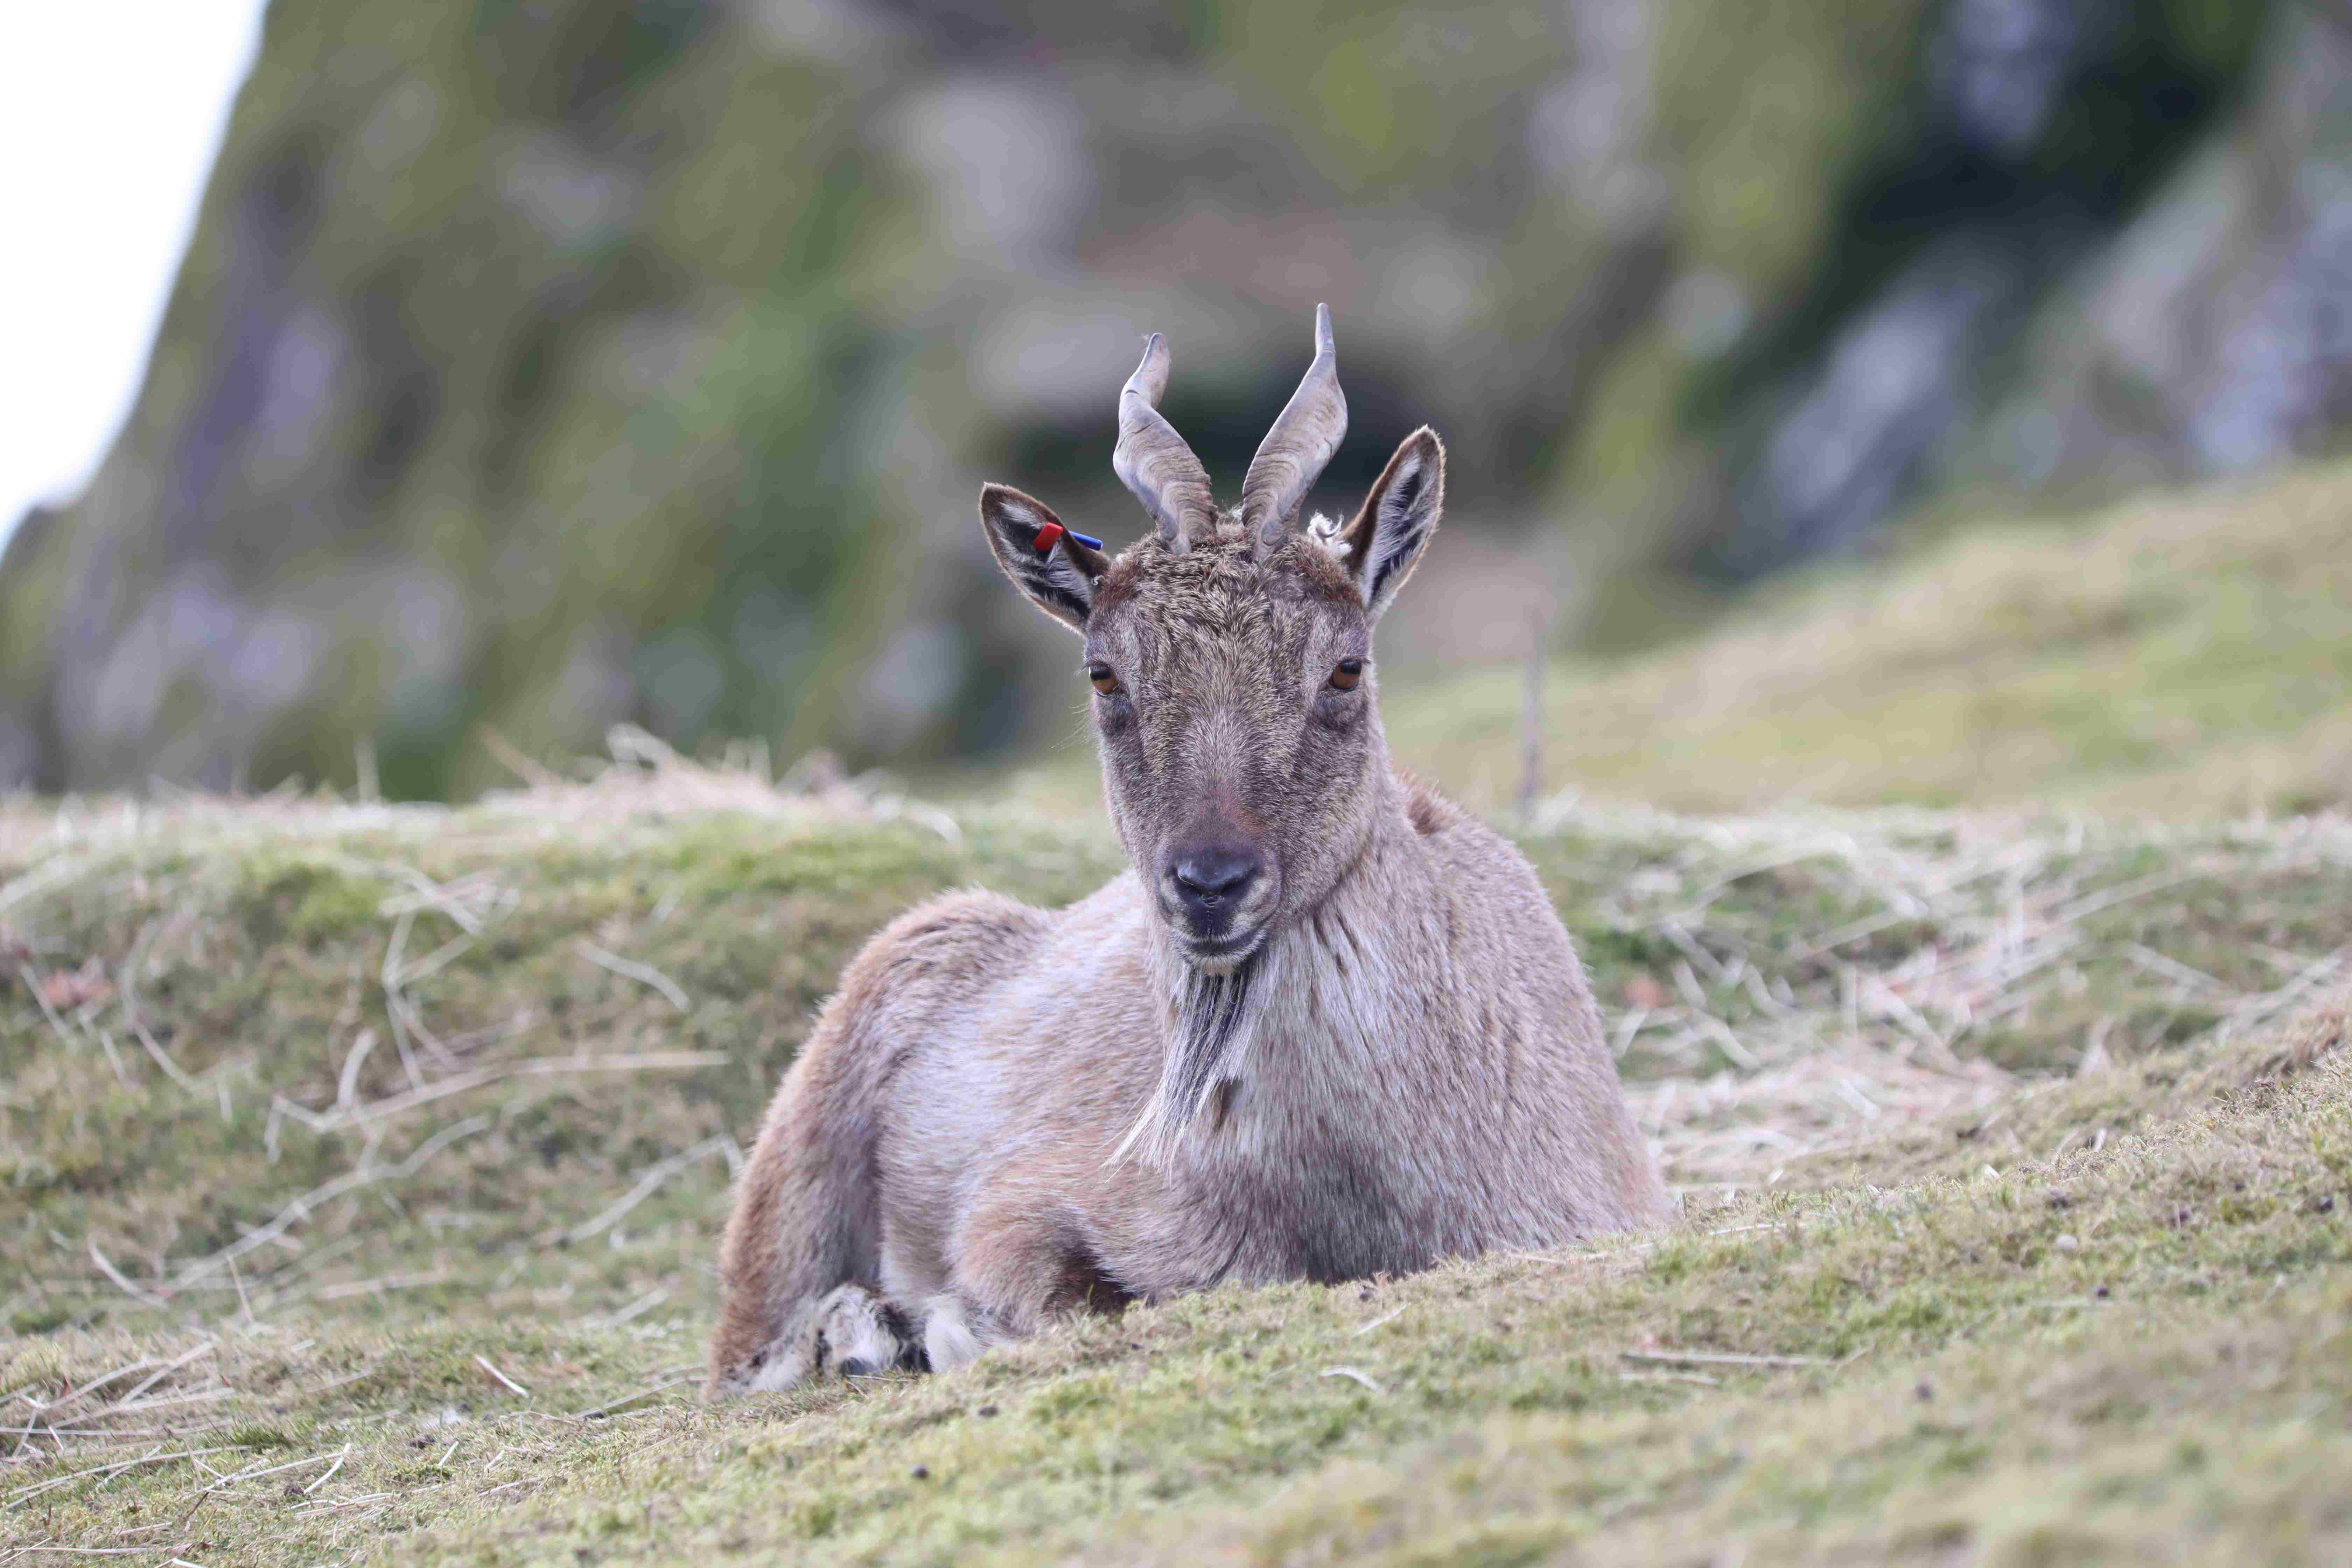 Turkmenian markhor sat on a hillside looking at the camera [eye contact] IMAGE: Amy Middleton 2023